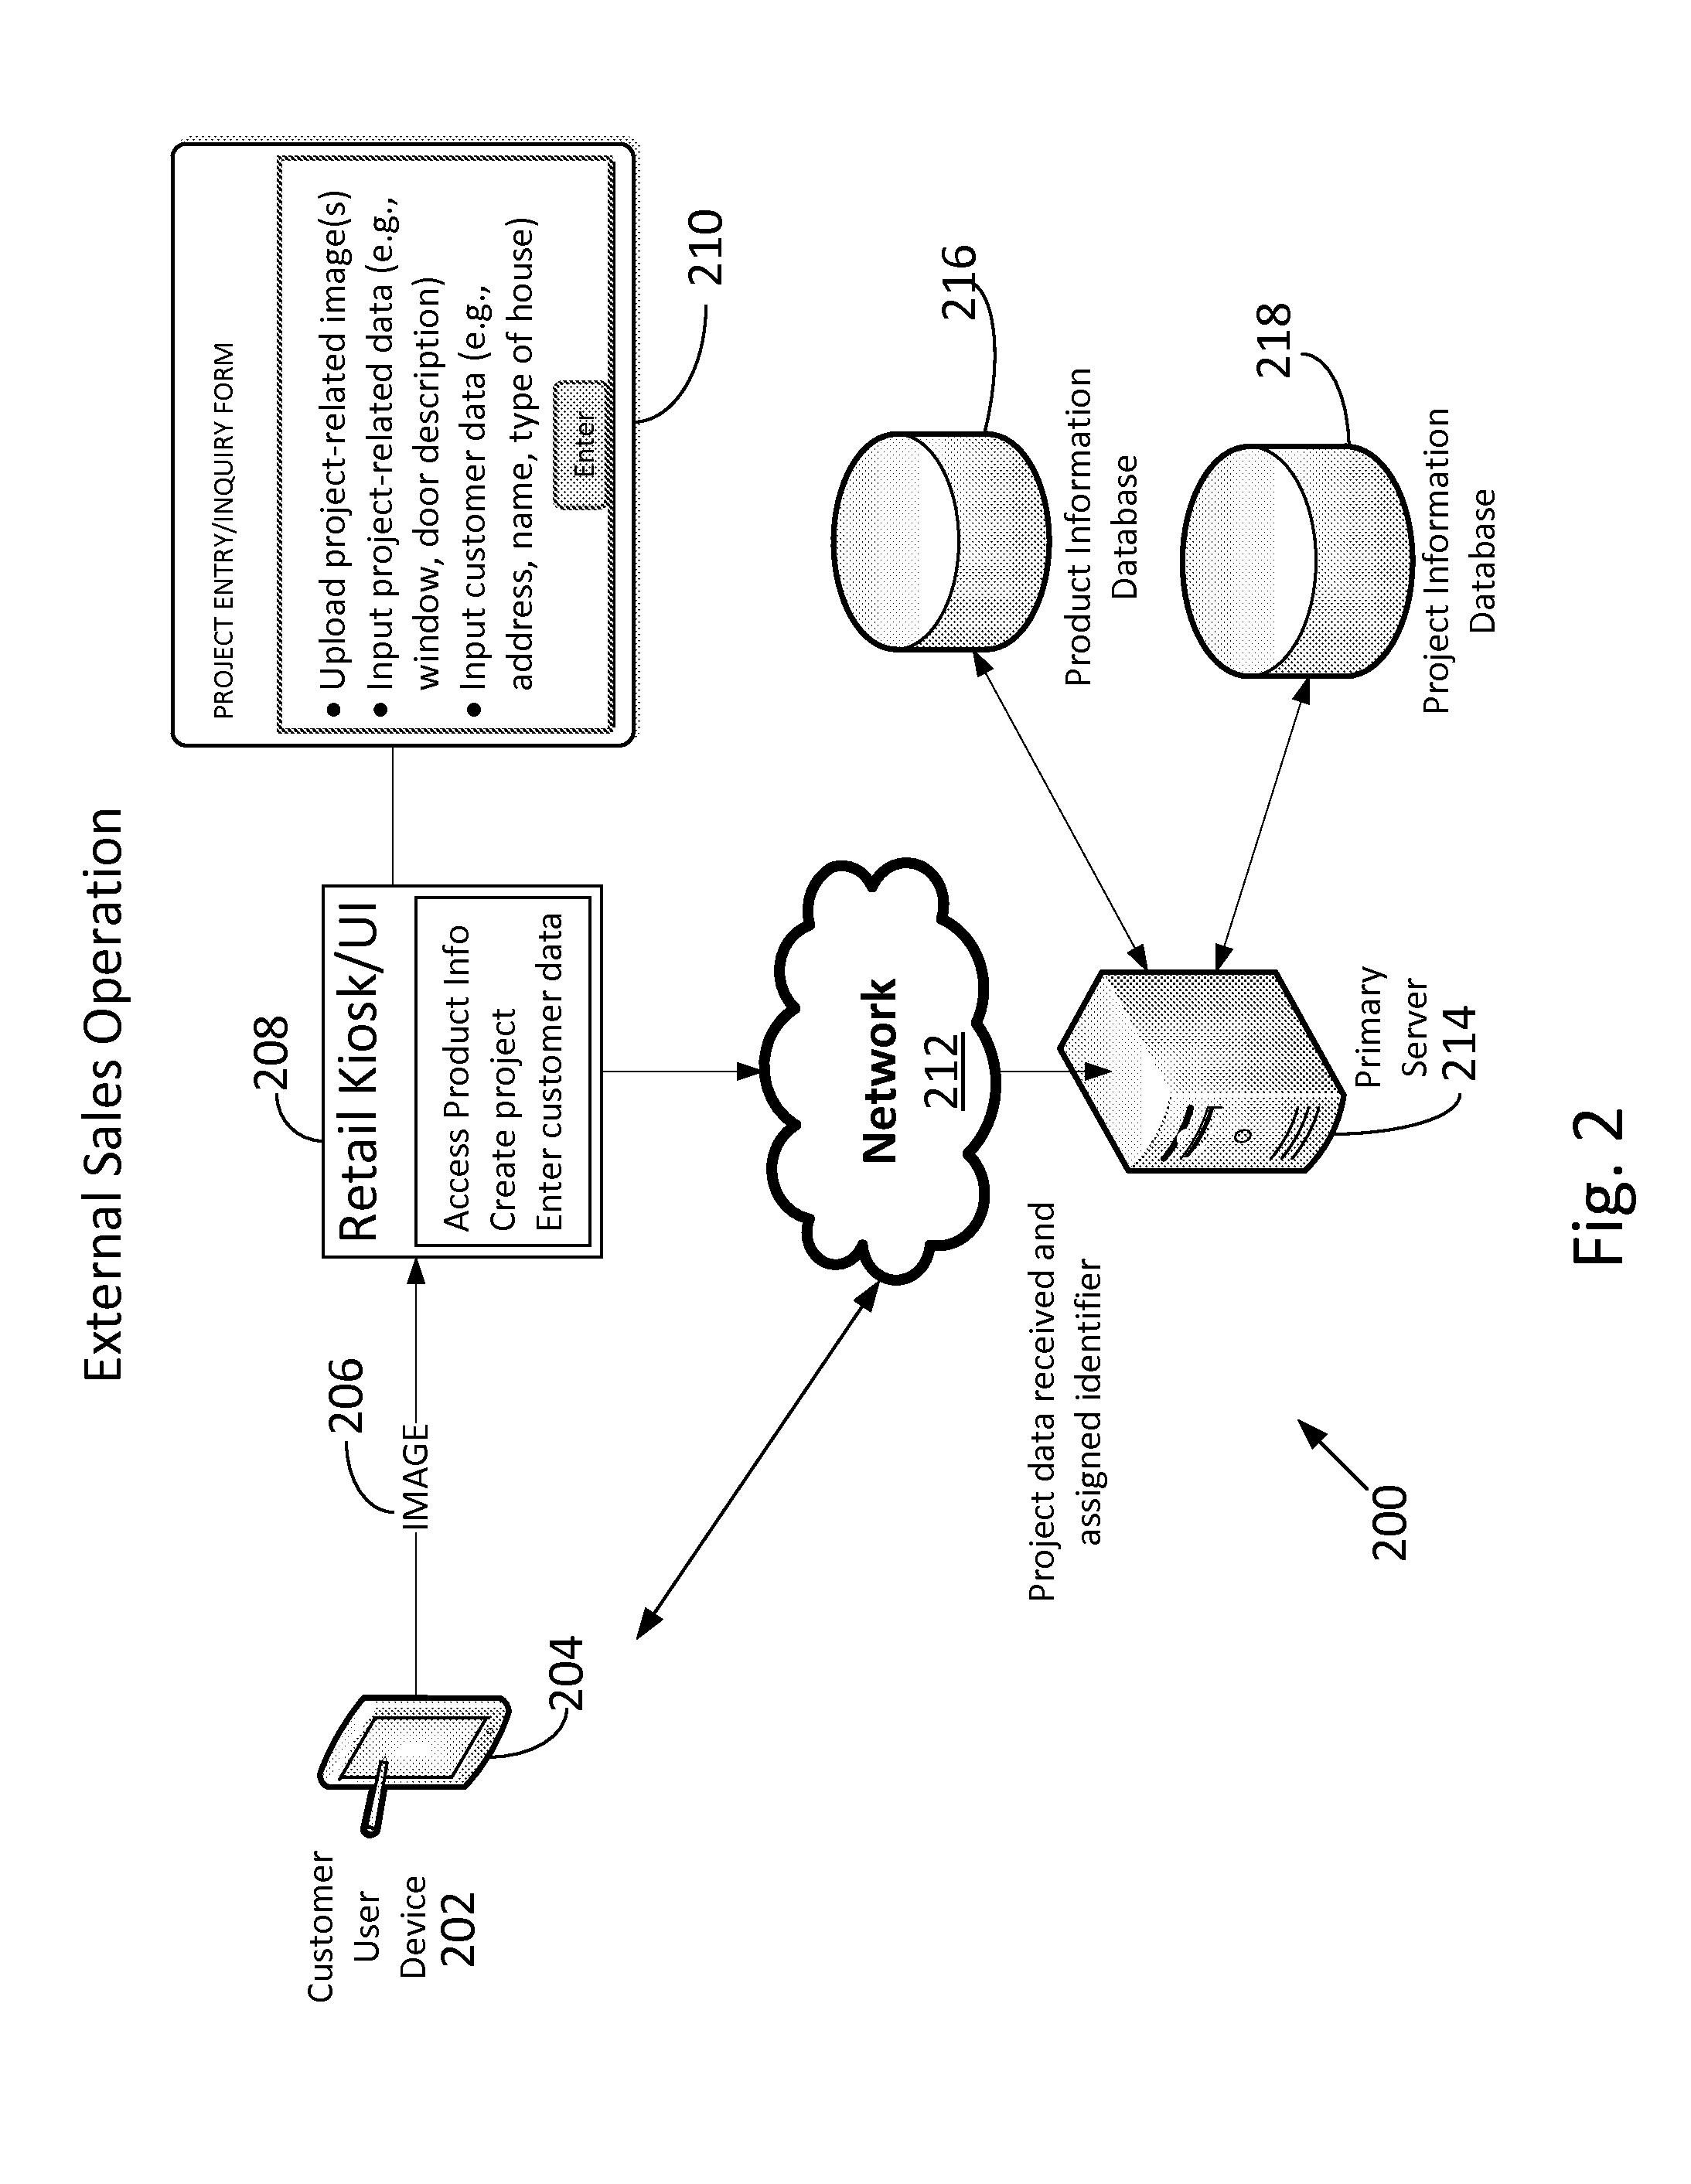 Method and system for providing enhanced sales and marketing tool